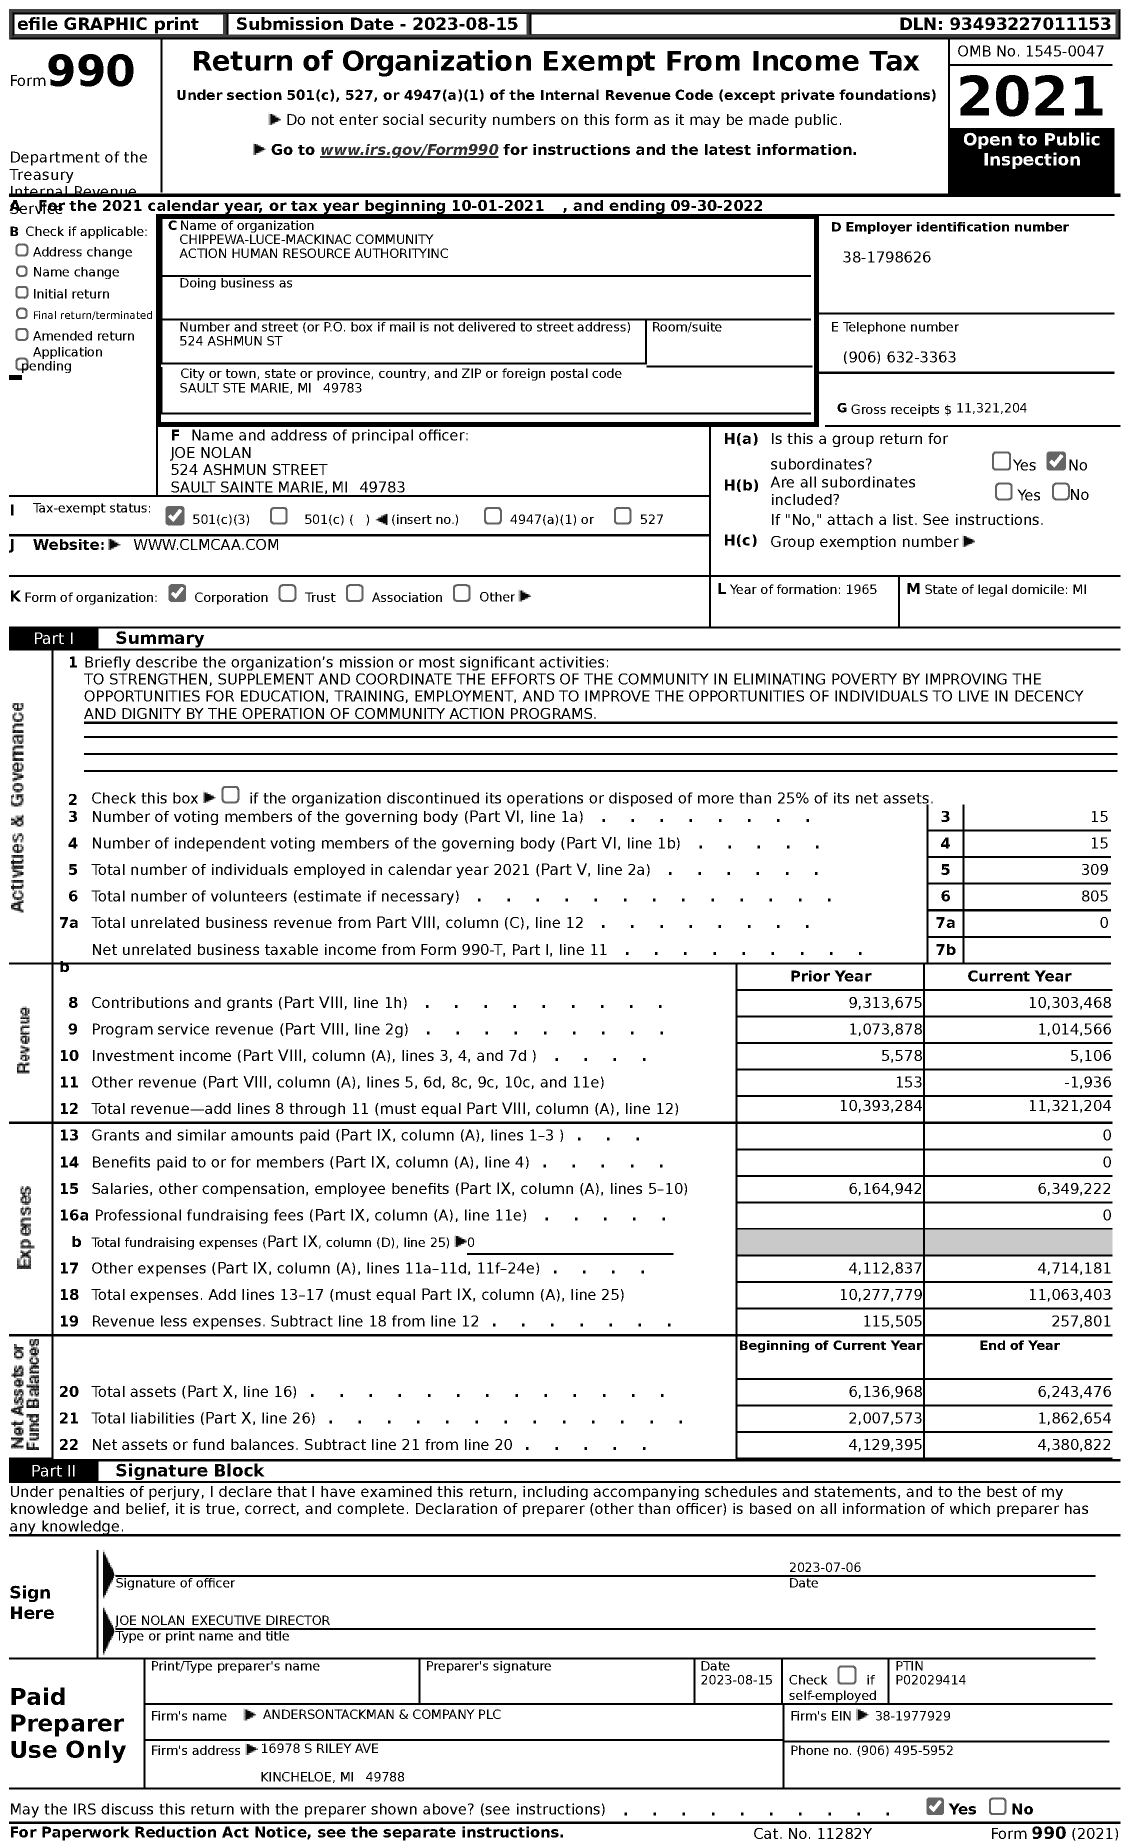 Image of first page of 2021 Form 990 for Chippewa-Luce-Mackinac Community Action Human Resource Authority